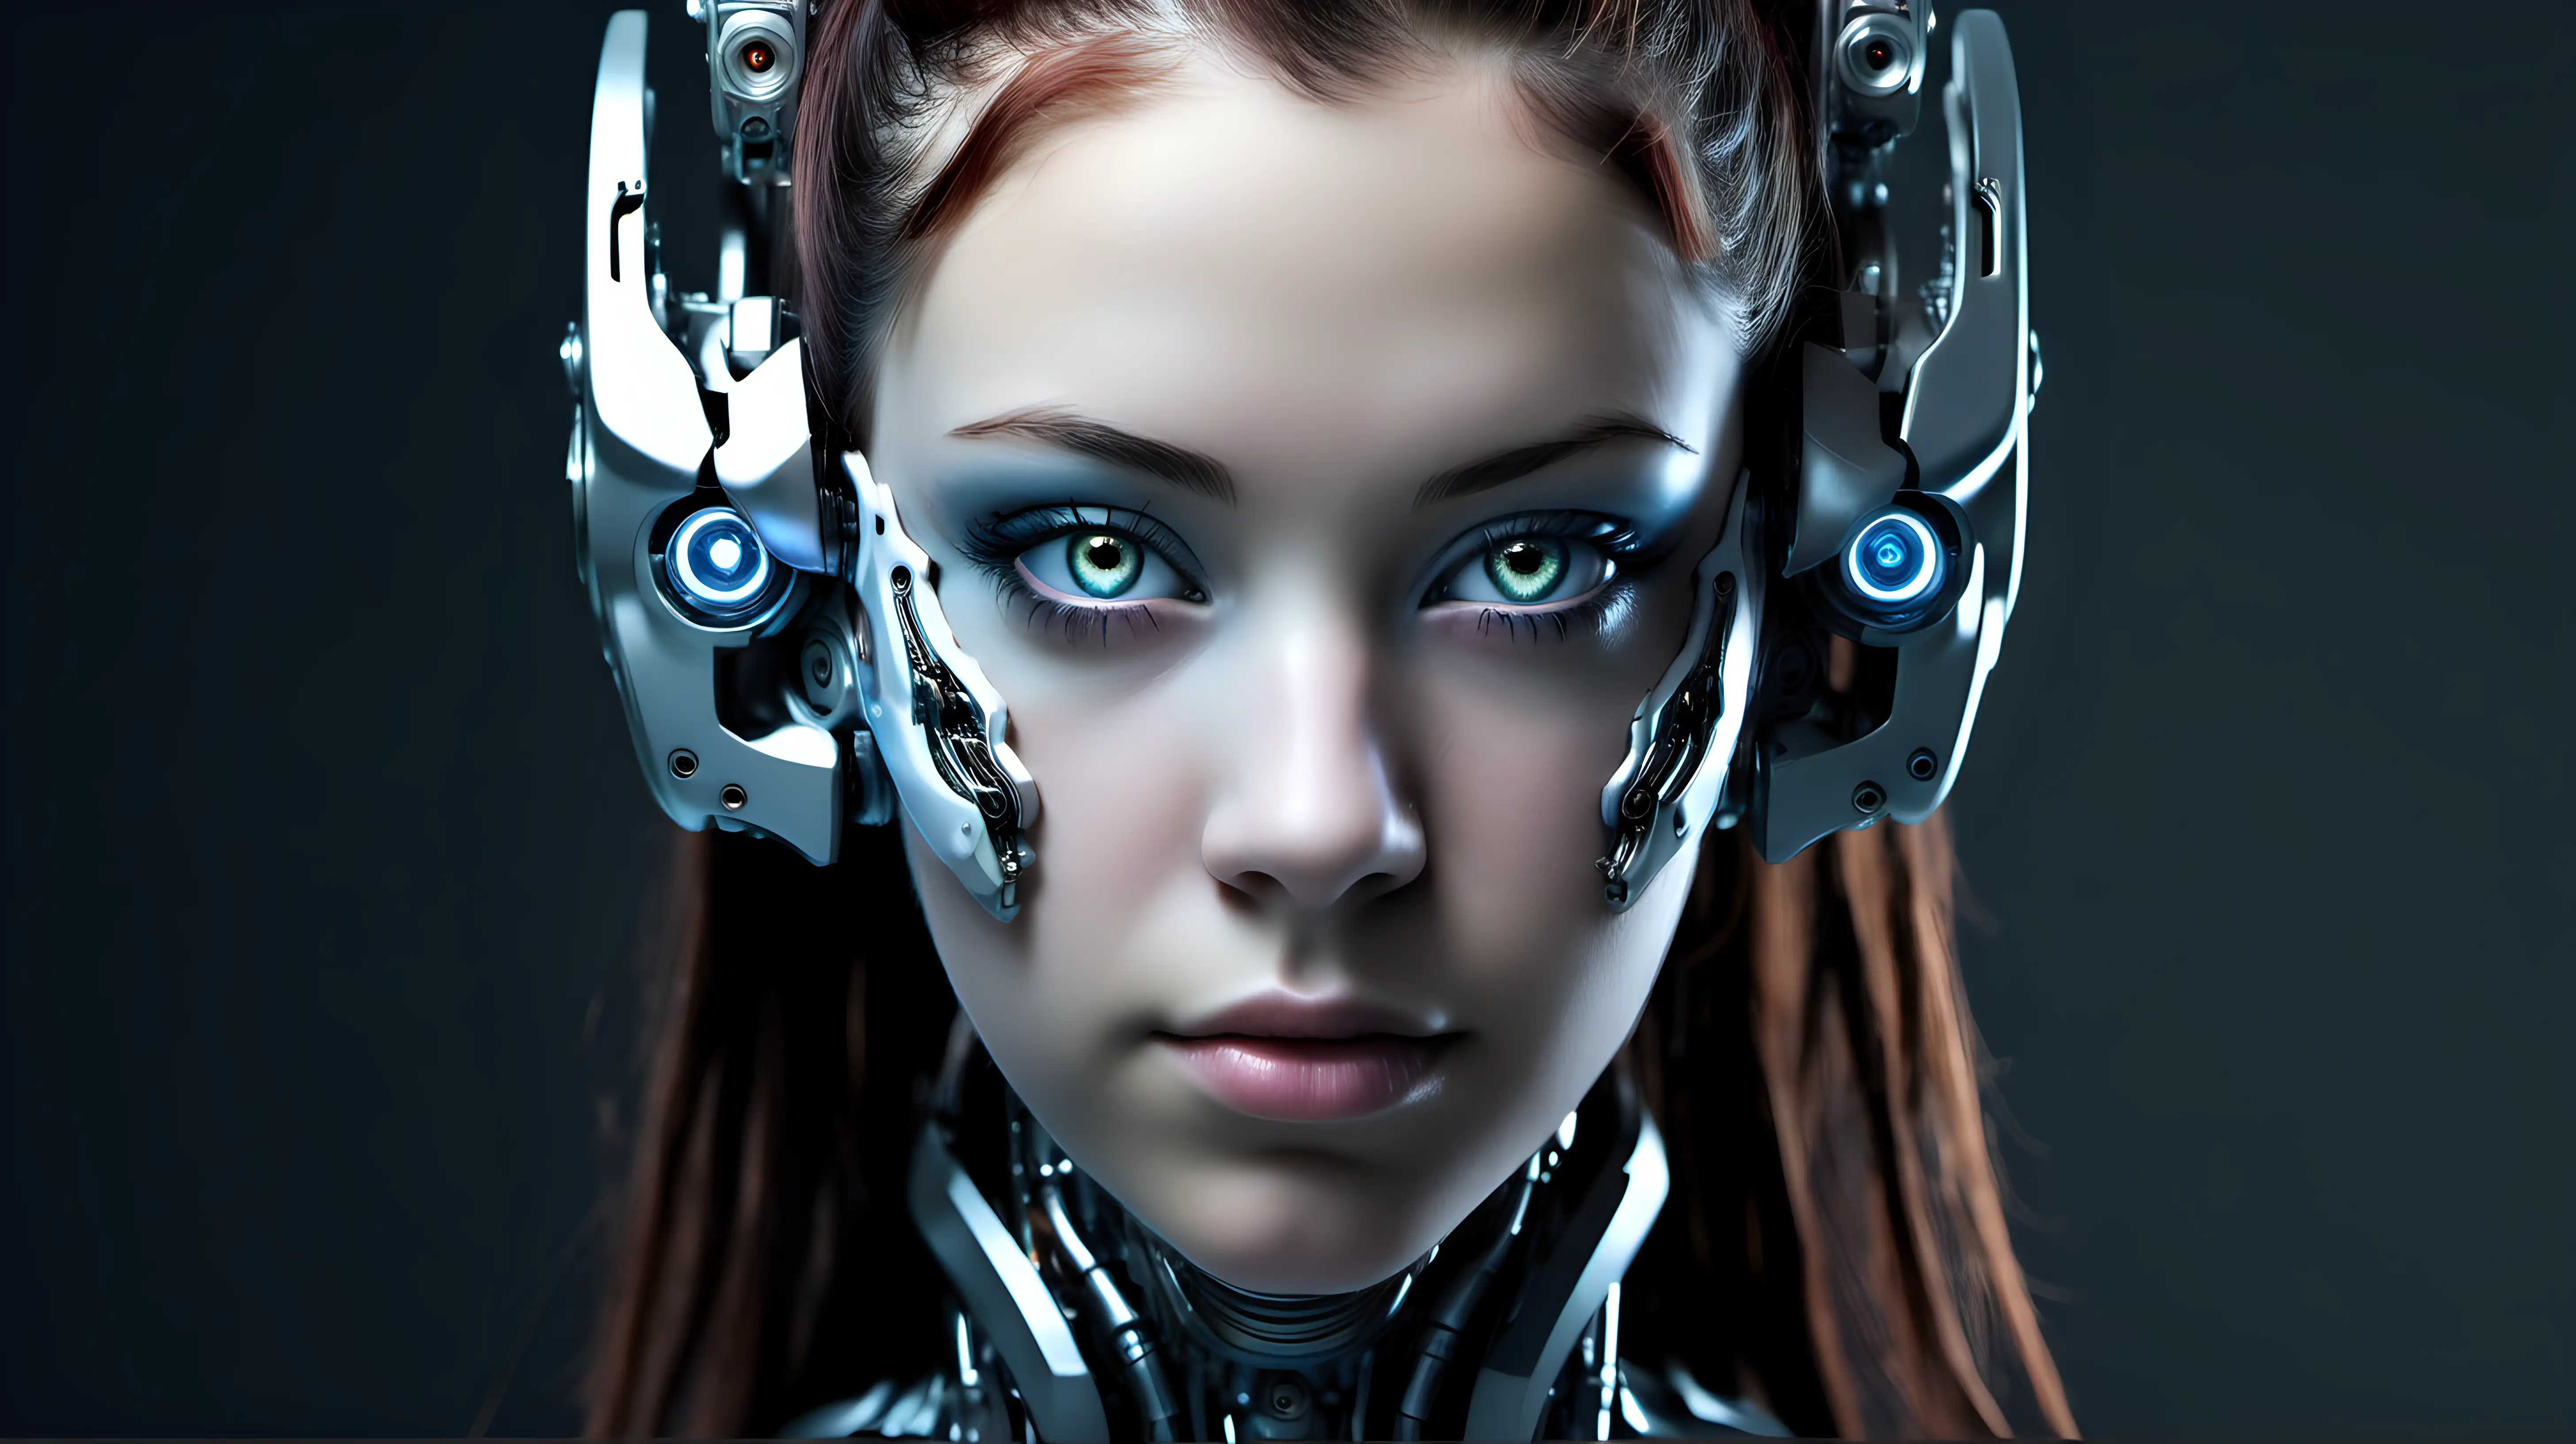 Cyborg woman, 18 years old. She has a cyborg face, but she is extremely beautiful. Natural eyes. She has beautiful ears.